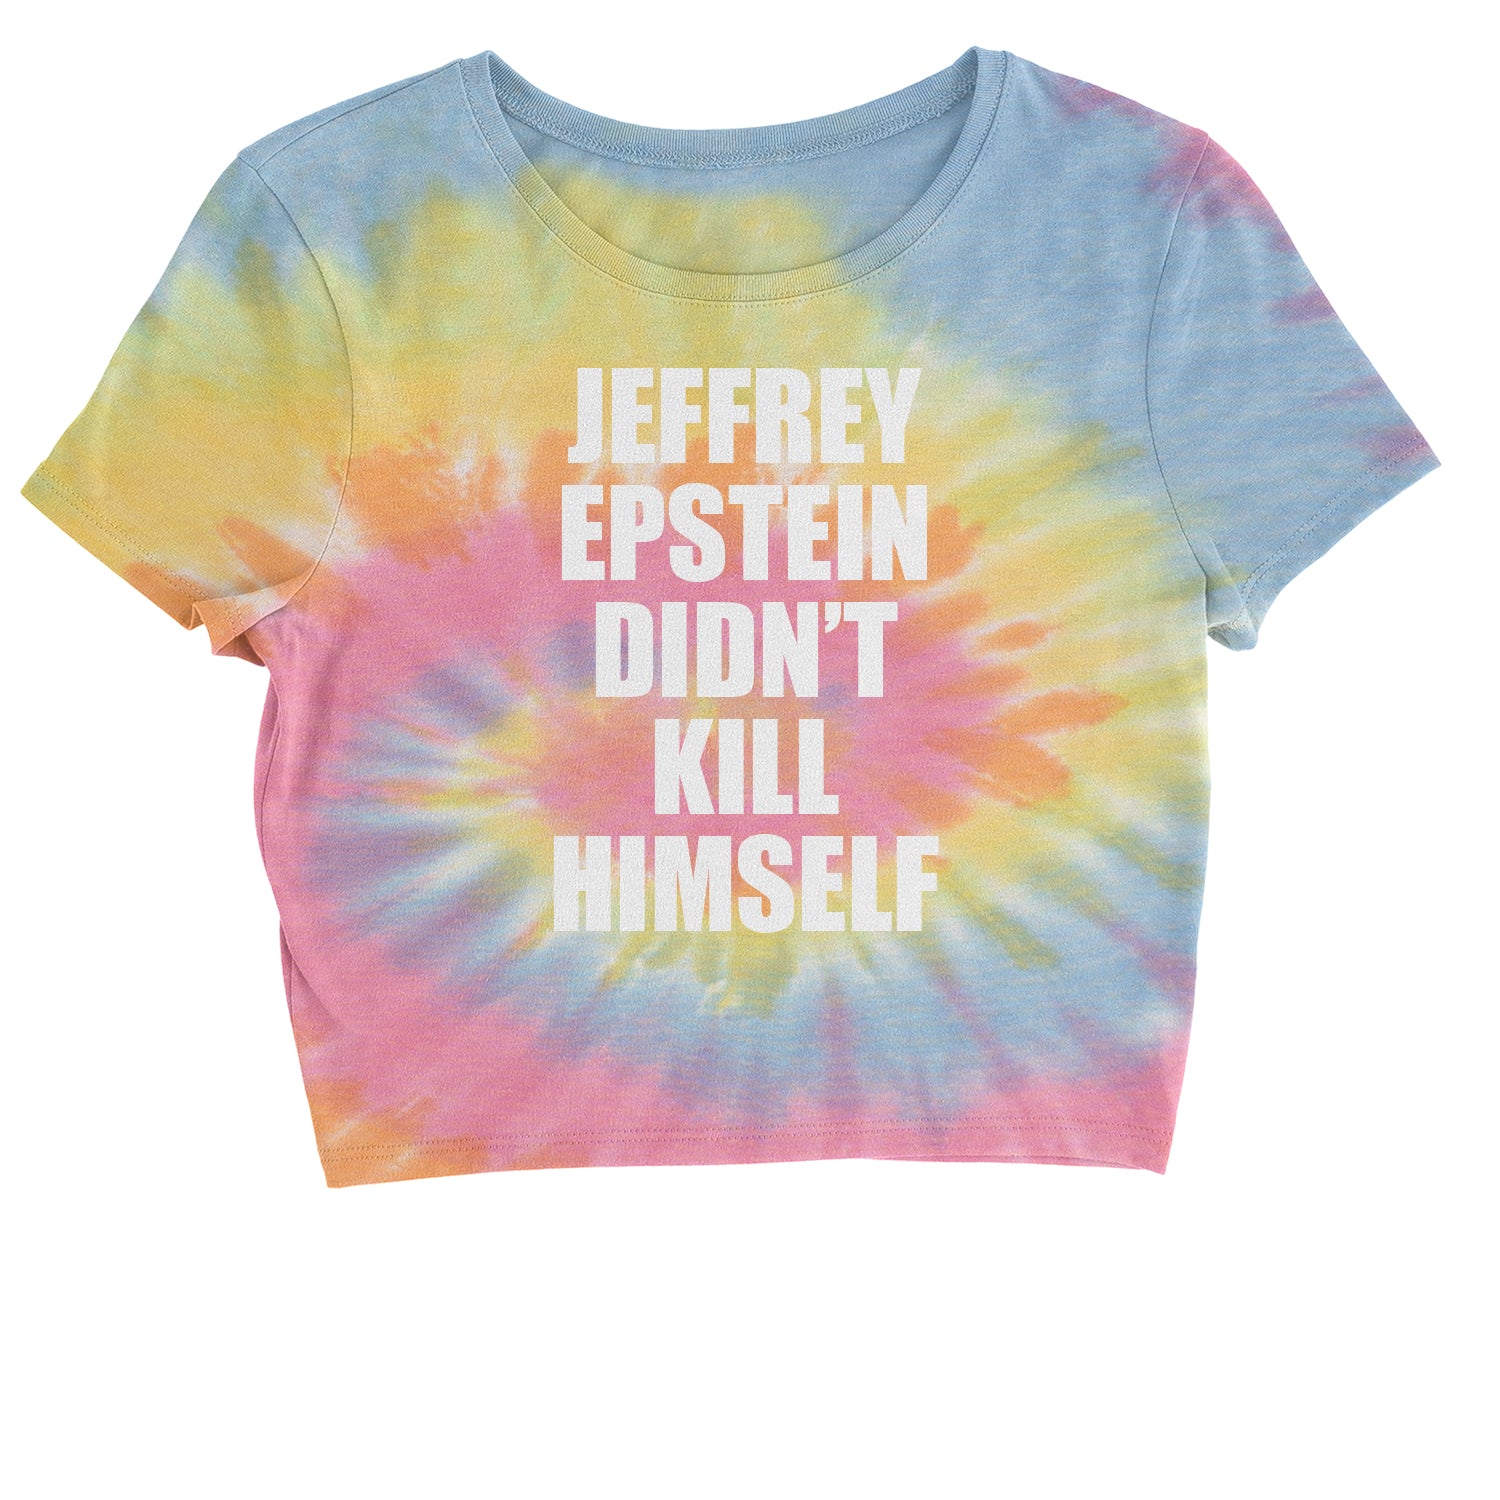 Jeffrey Epstein Didn't Kill Himself Cropped T-Shirt coverup, homicide, murder, ssadgk, trump by Expression Tees